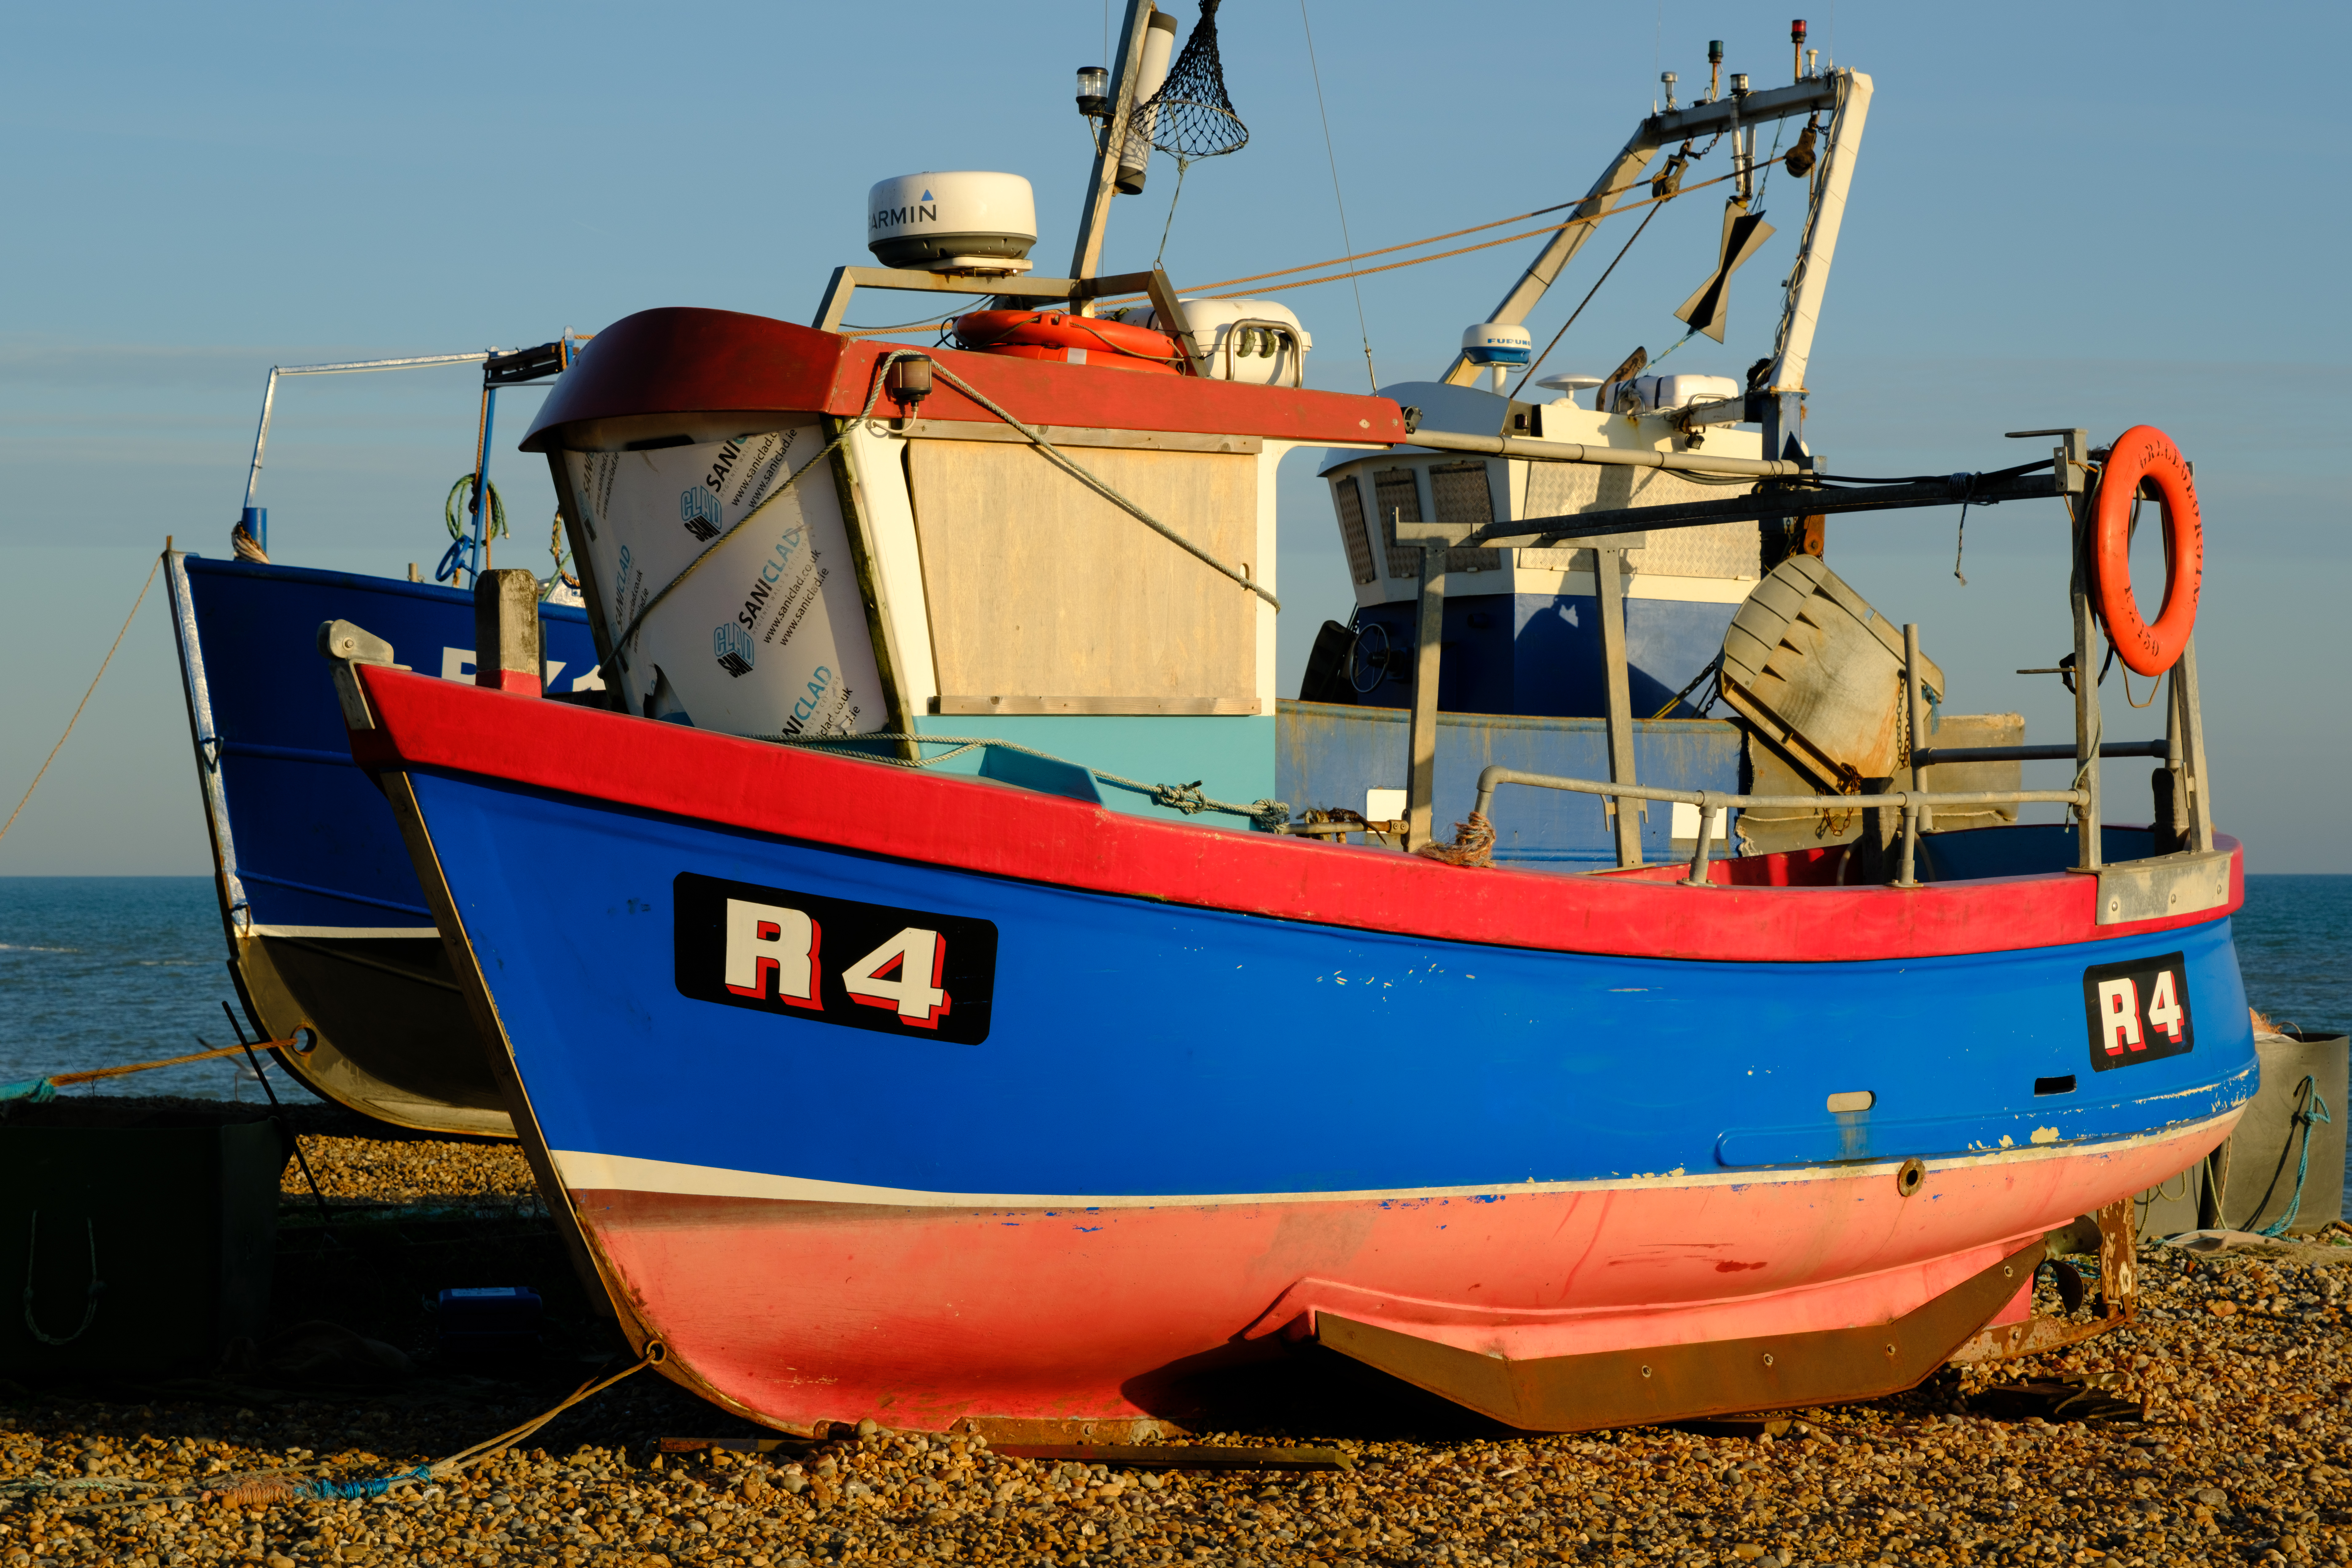 Fujifilm X-T5 sample image, two red and blue small fishing boat on the shore, 